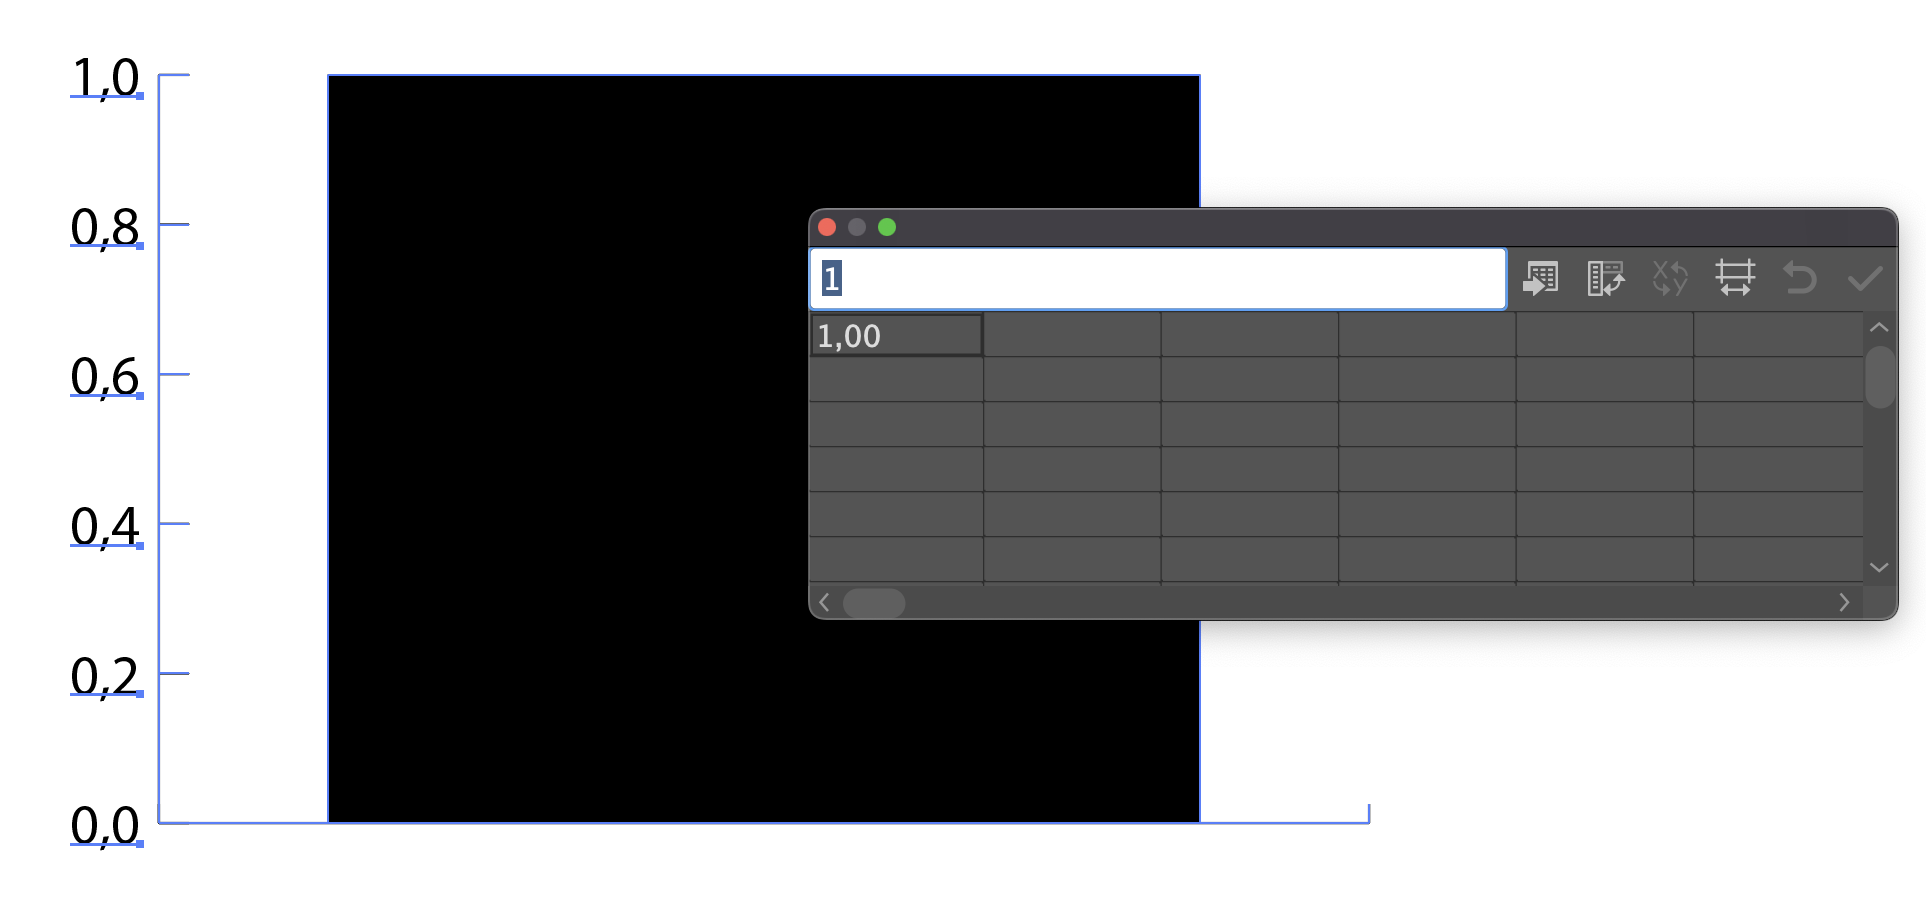 Screenshot of the Adobe Illustrator Graph tool, showing a very basic bar chart with one bar in black, and a data table with the value of 1 in a single cell